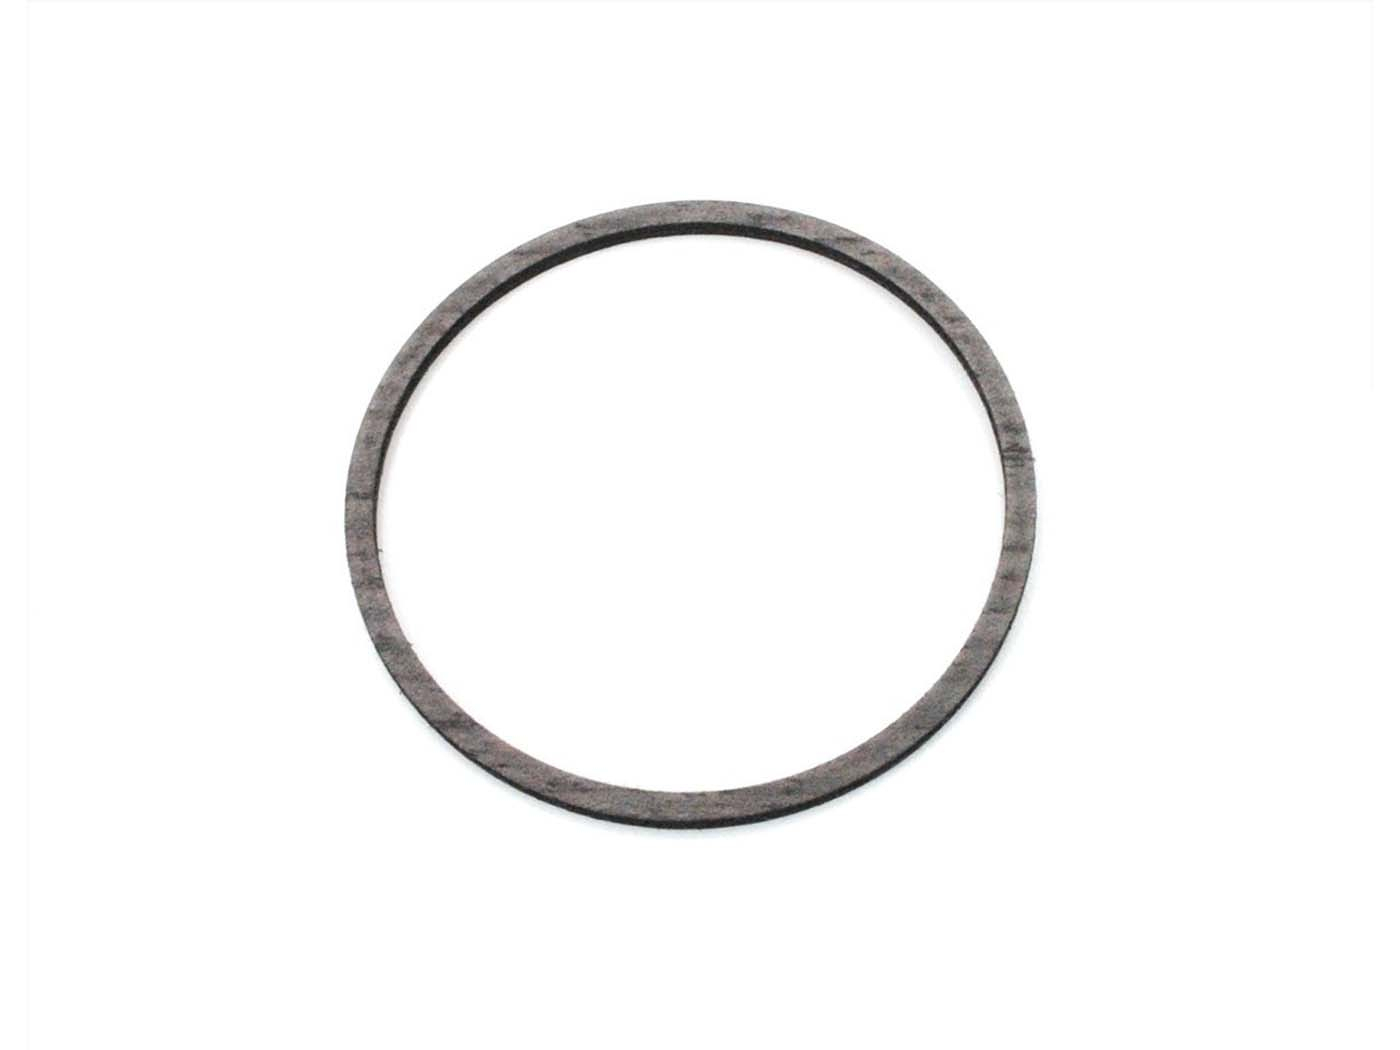 Gasket No. 22 For Bing Carburetor Type 1/10/126 A For Kreidler Flory MF 2, Kreidler Flory MF 12, Kreidler Flory MF 13, Kreidler Flory MF 23